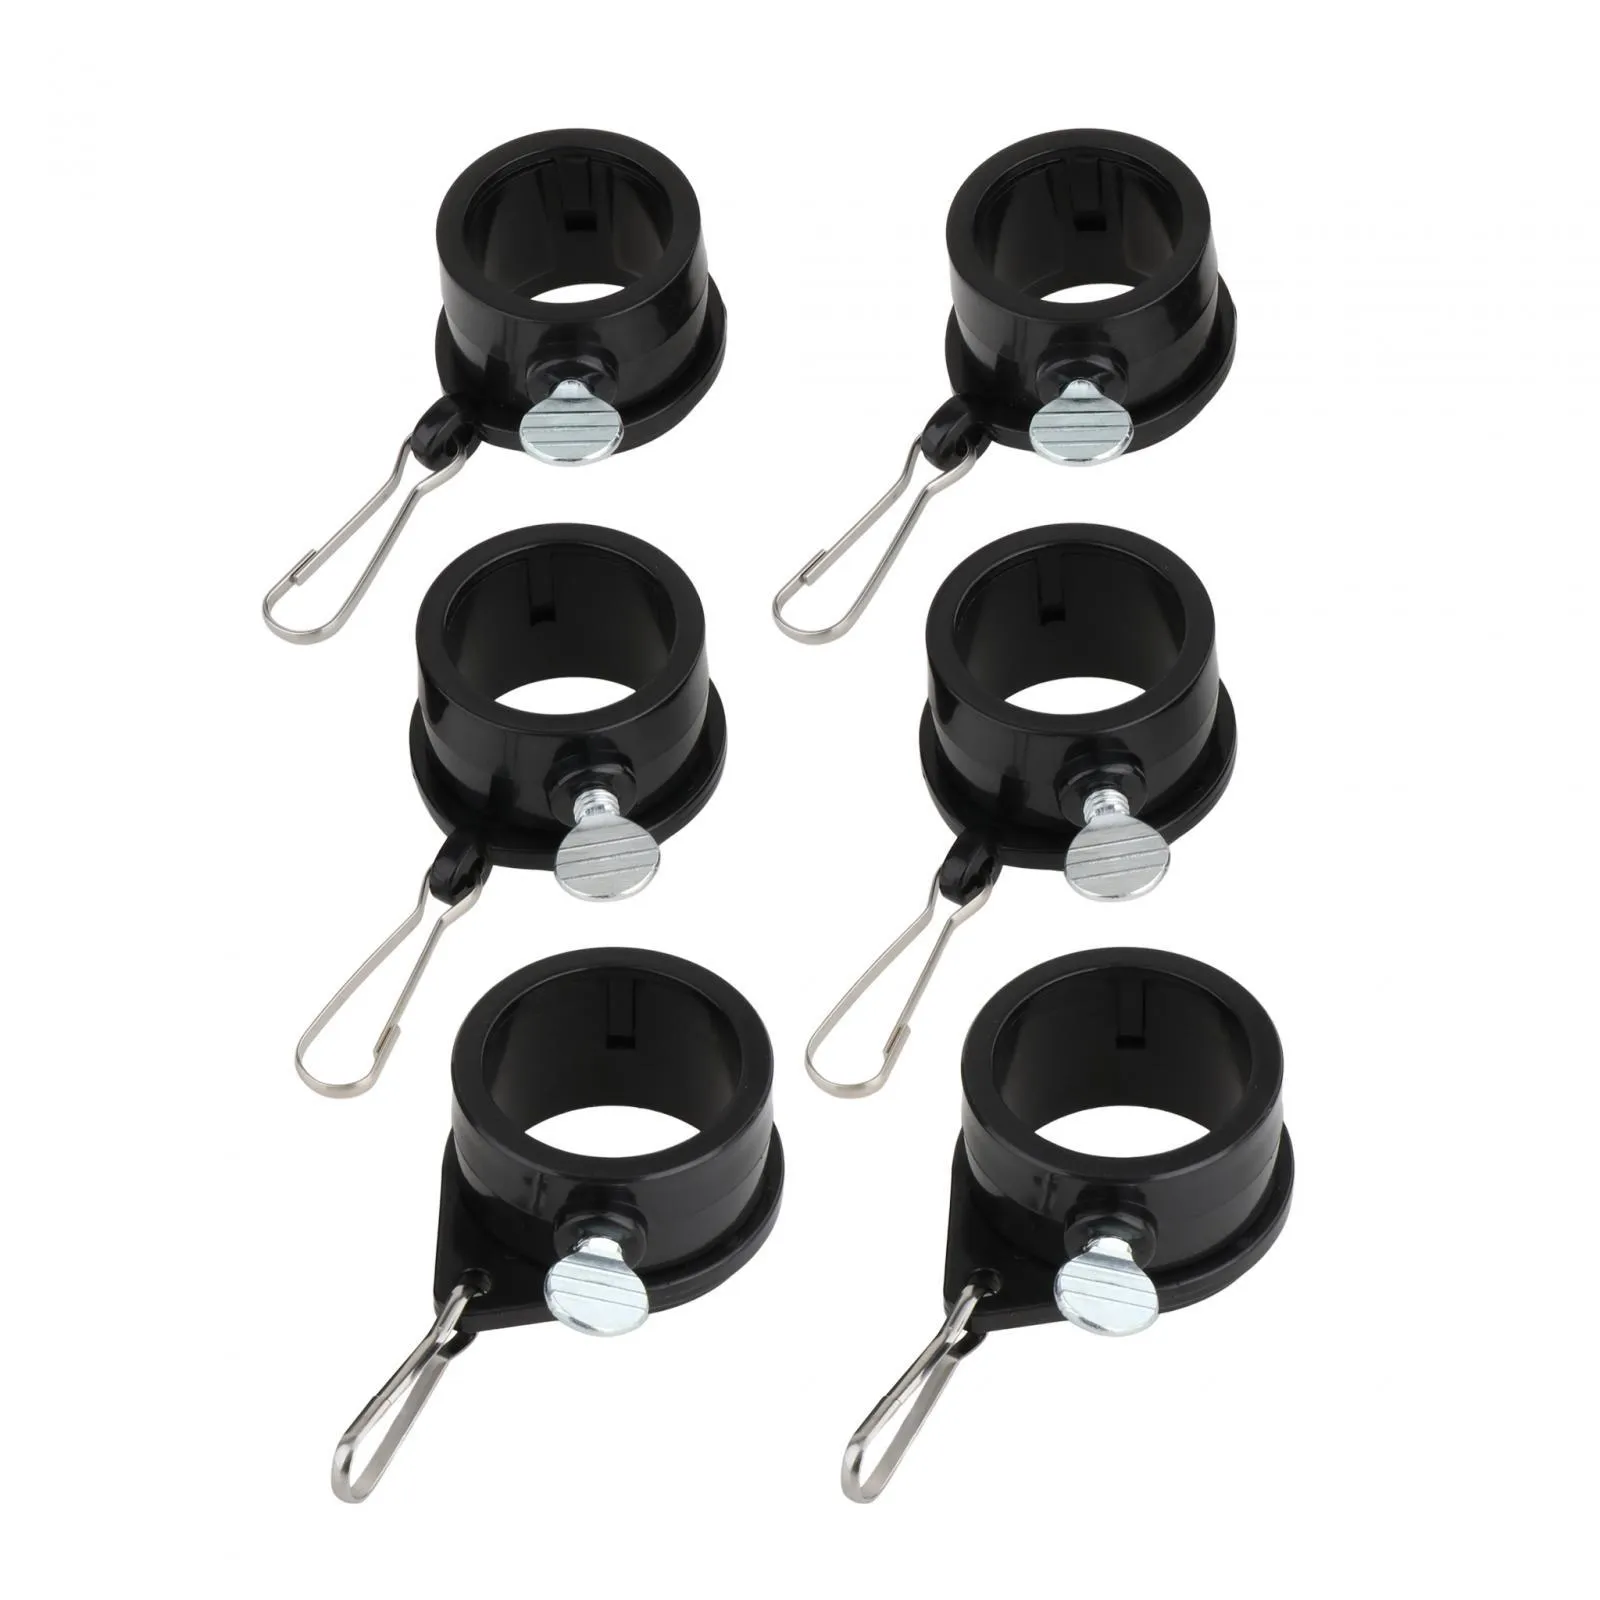 2 Pieces Tangles Free Flag Pole Clips Weatherproof Durable with Carabiners for Grommet Flags Clamp Hardware Flagpole Rings